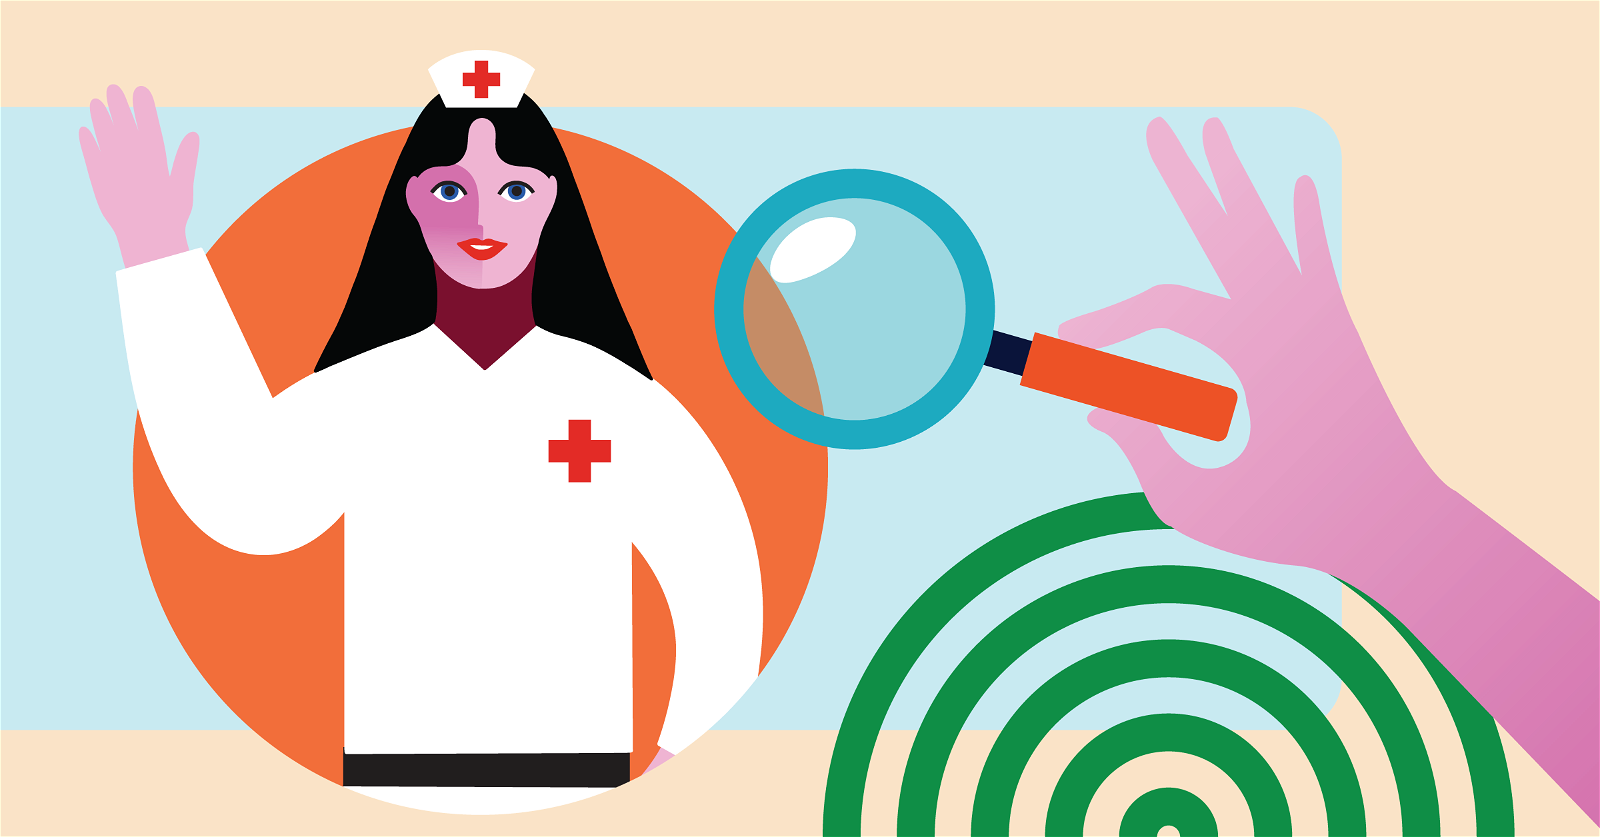 Illustration of a nurse with dark hair, wearing a white uniform and a red cross on the hat, raising a hand. A magnifying glass held by a hand on the right side focuses on the nurse. A green concentric circle pattern is in the foreground.